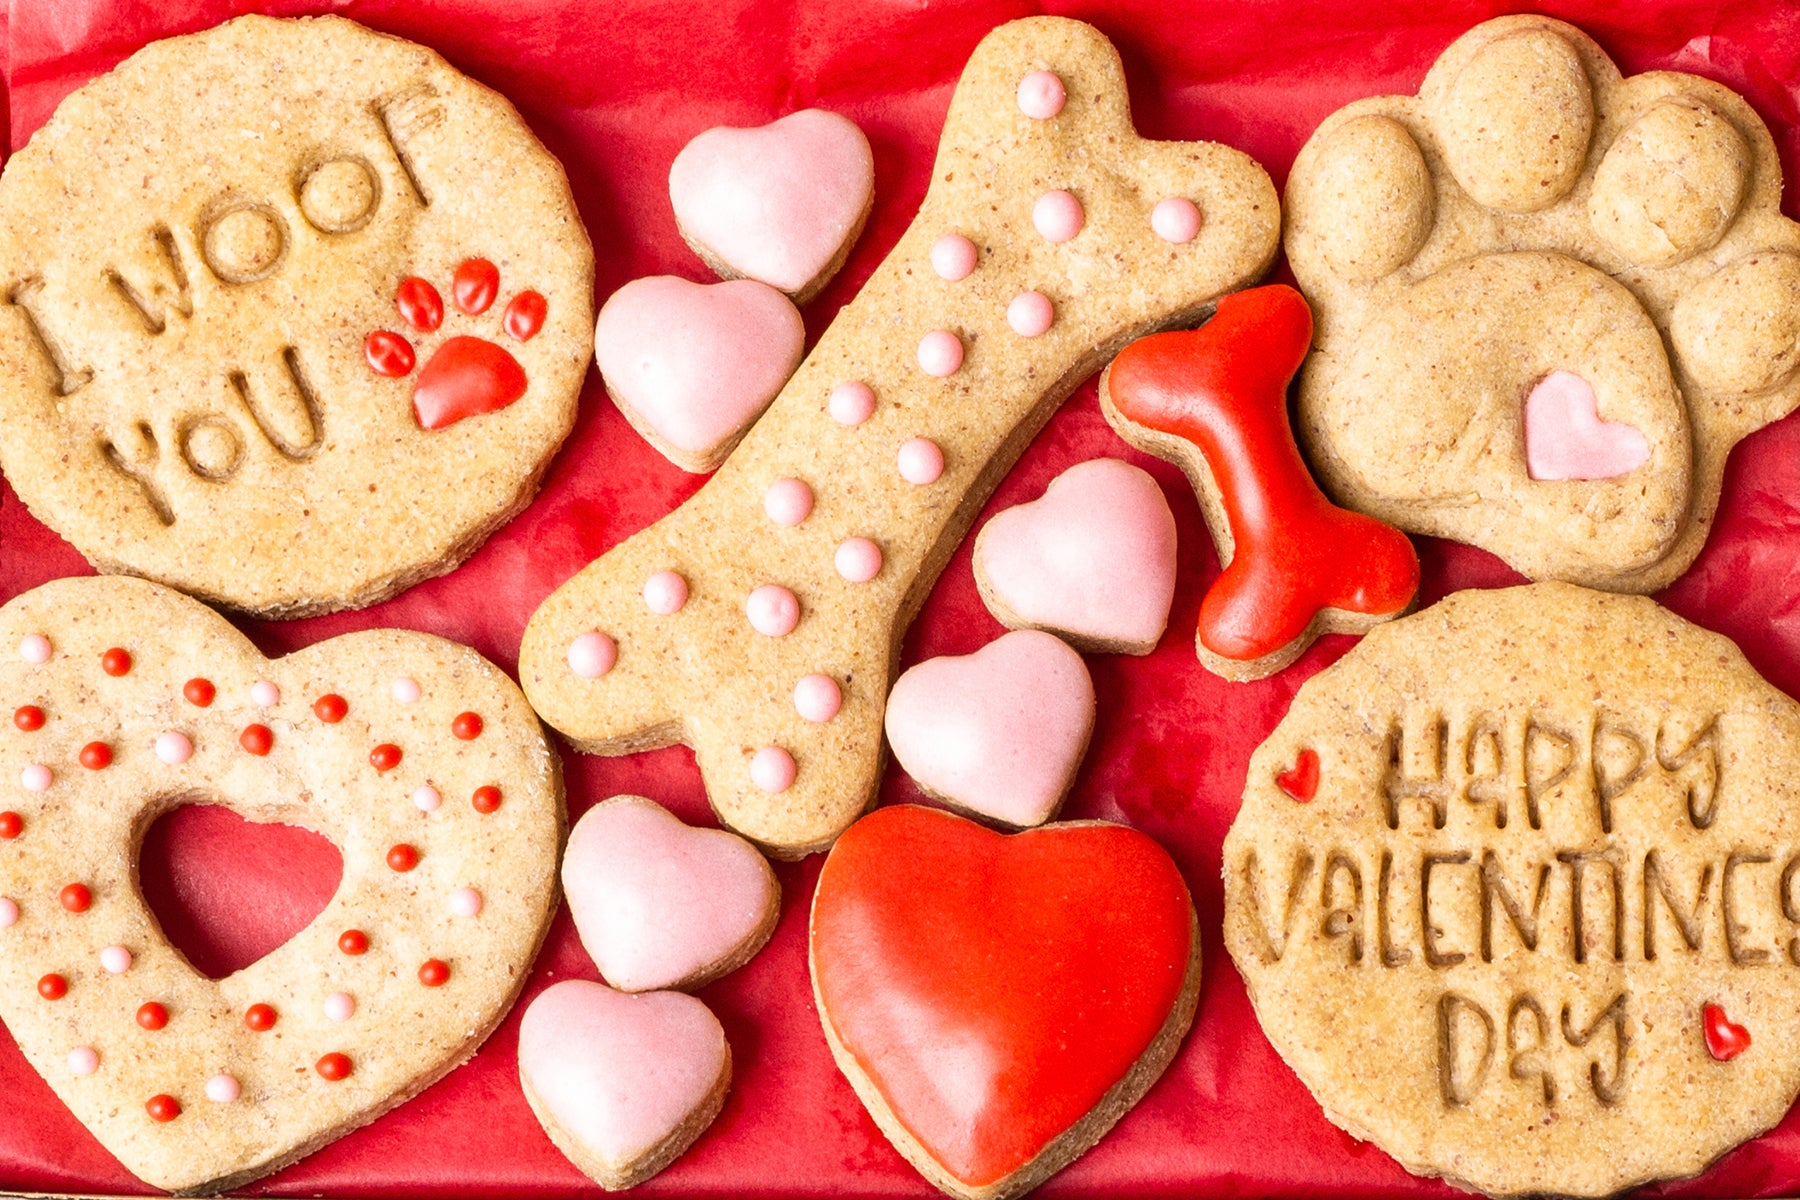 A free Valentine's gift for your dog this February - our "I Woof You" Biscuit Box